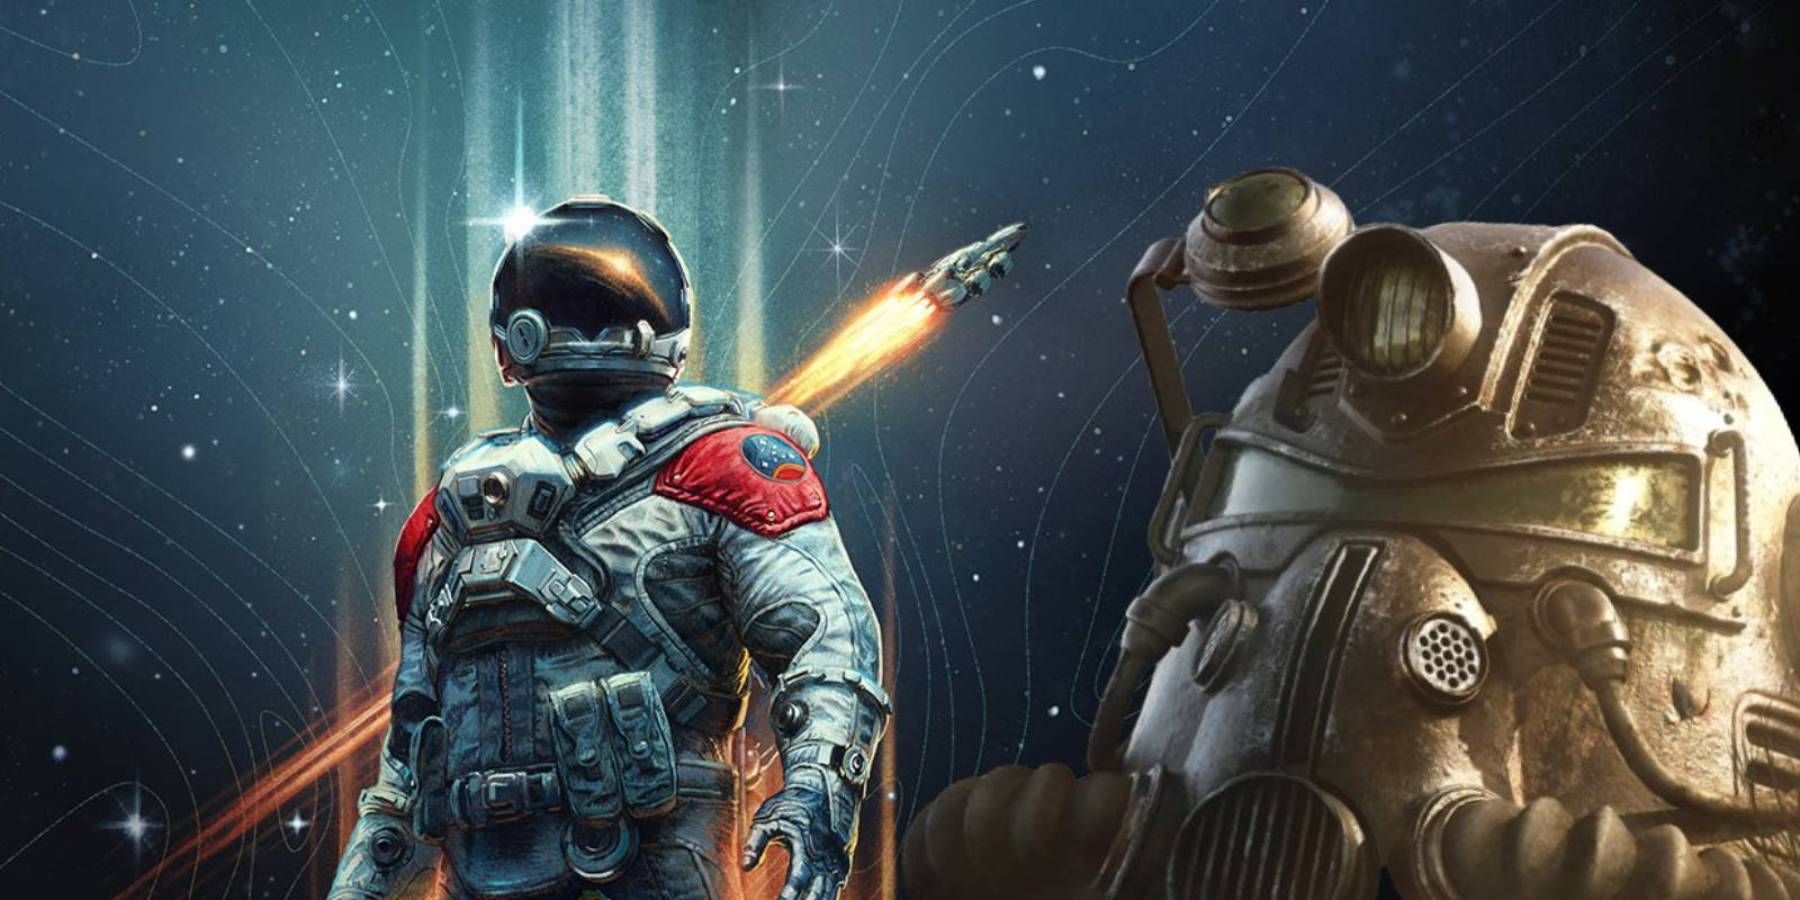 The astronaut from Starfield promo art with a power armor helmet from Fallout 76